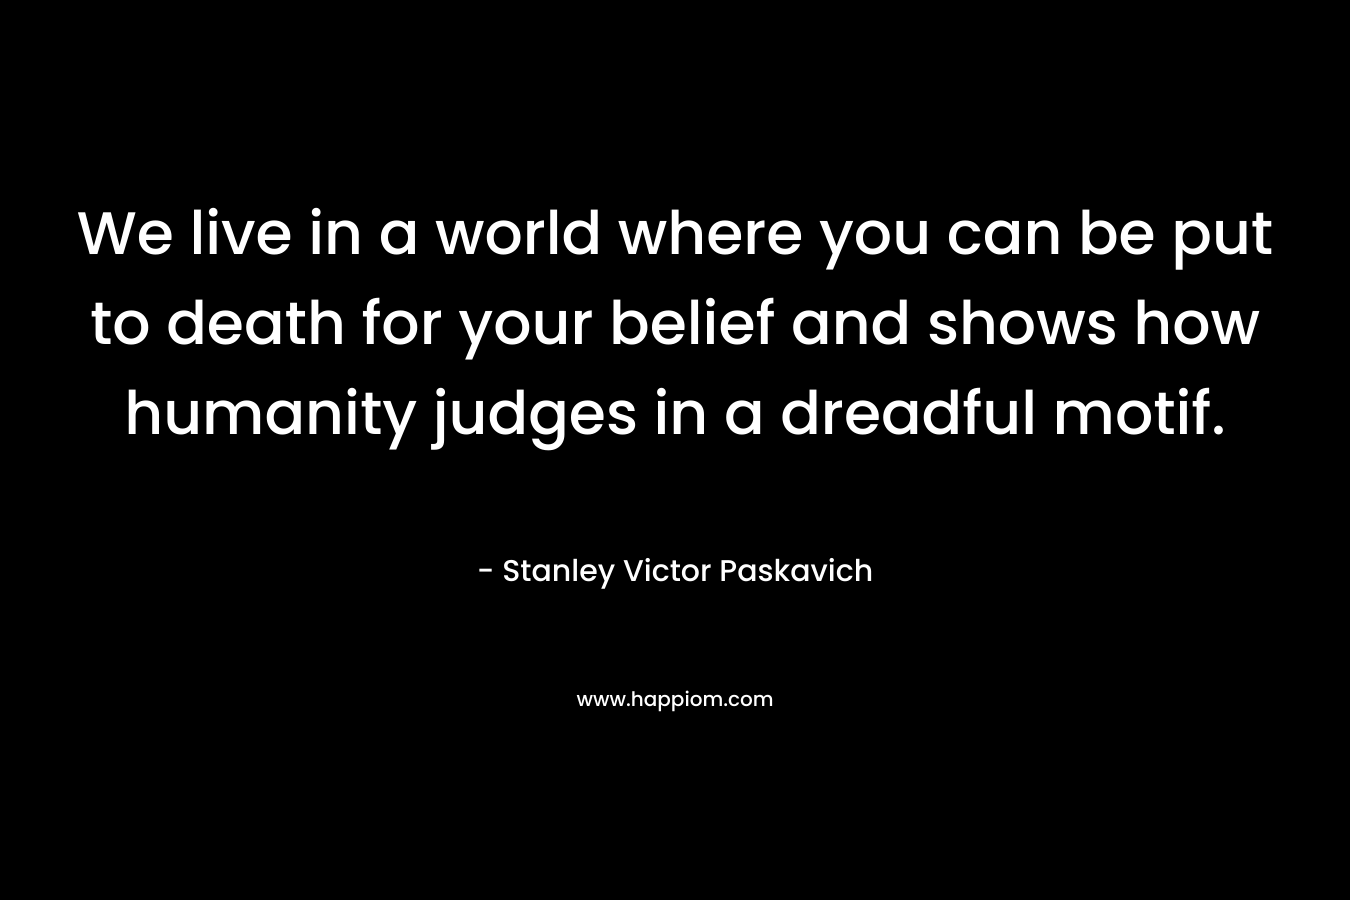 We live in a world where you can be put to death for your belief and shows how humanity judges in a dreadful motif.